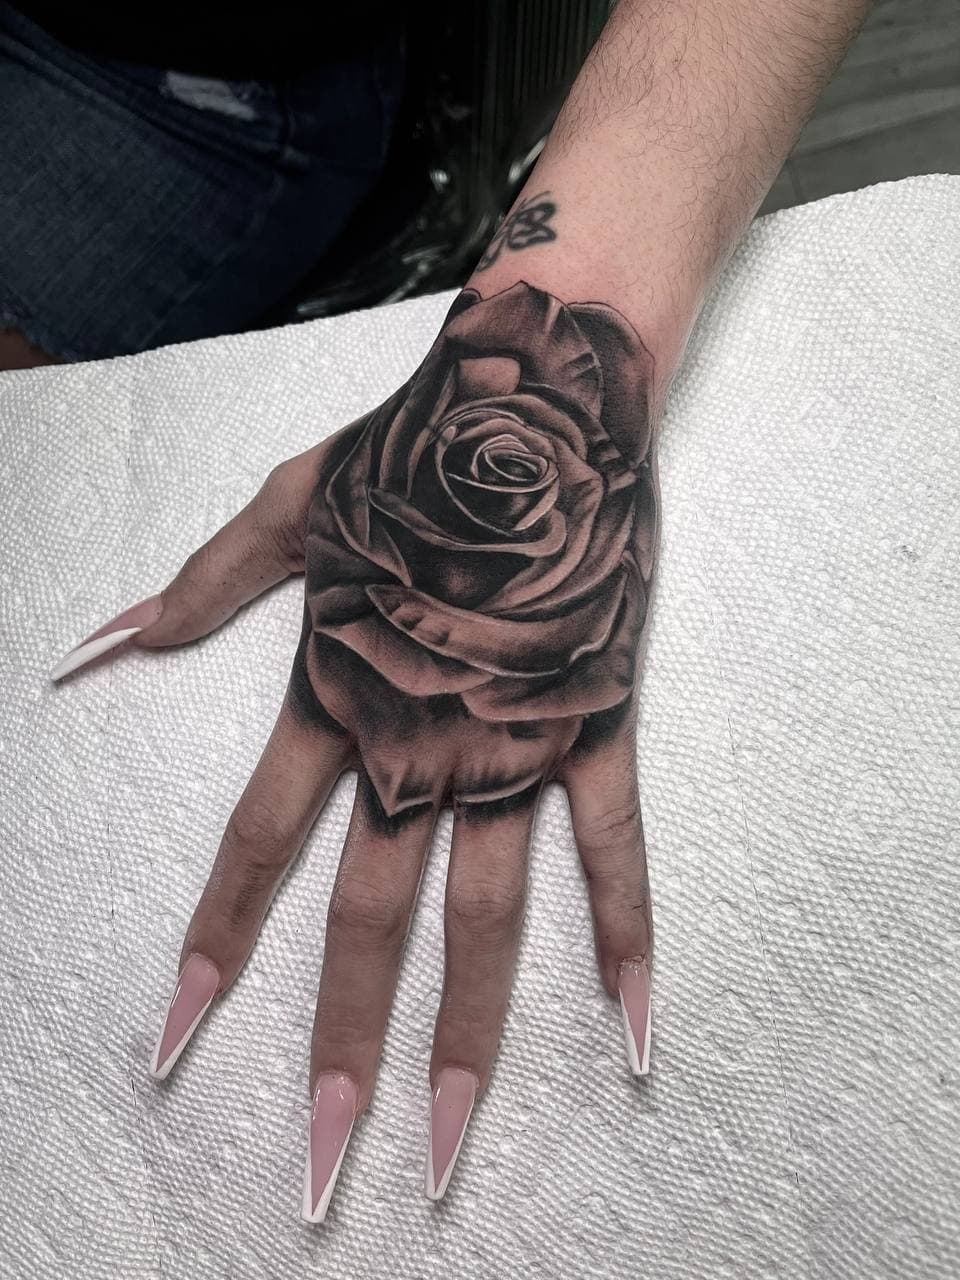 A Hand Tattoo Guide for Ladies: 10 Designs from Wholistic to Realistic